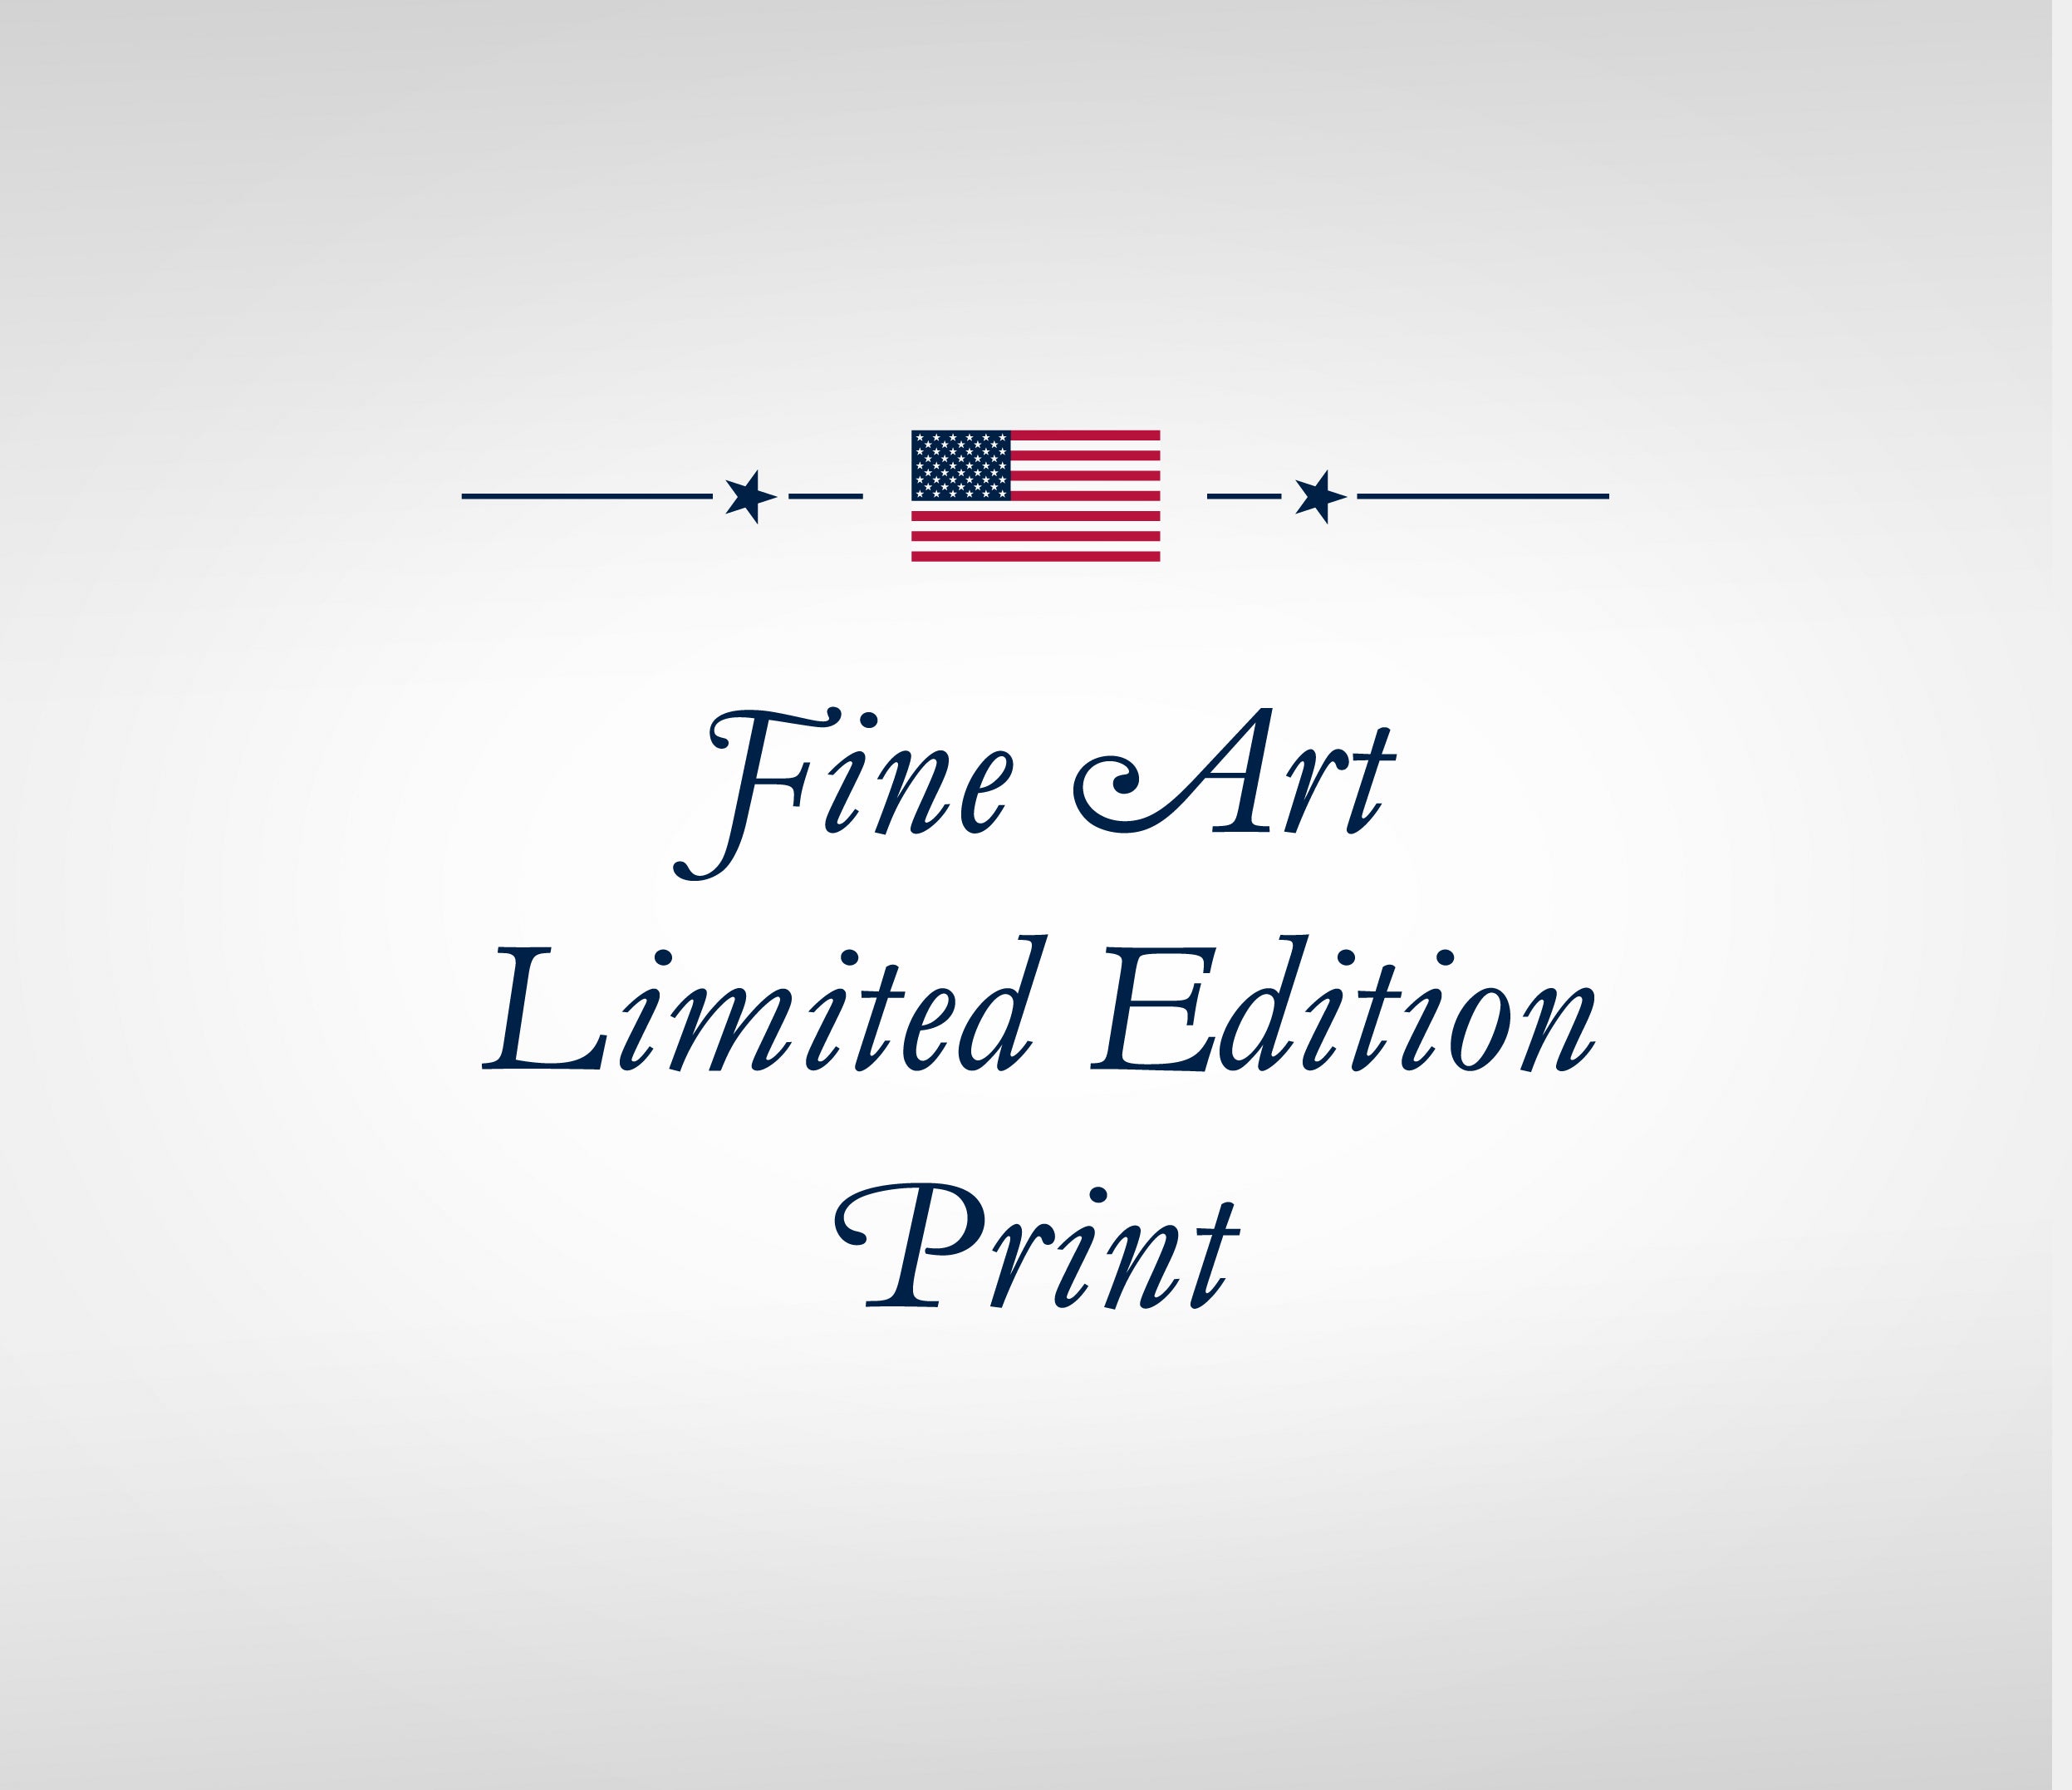 The Star-Spangled Banner Fine Art Limited Edition Print - PRESENT